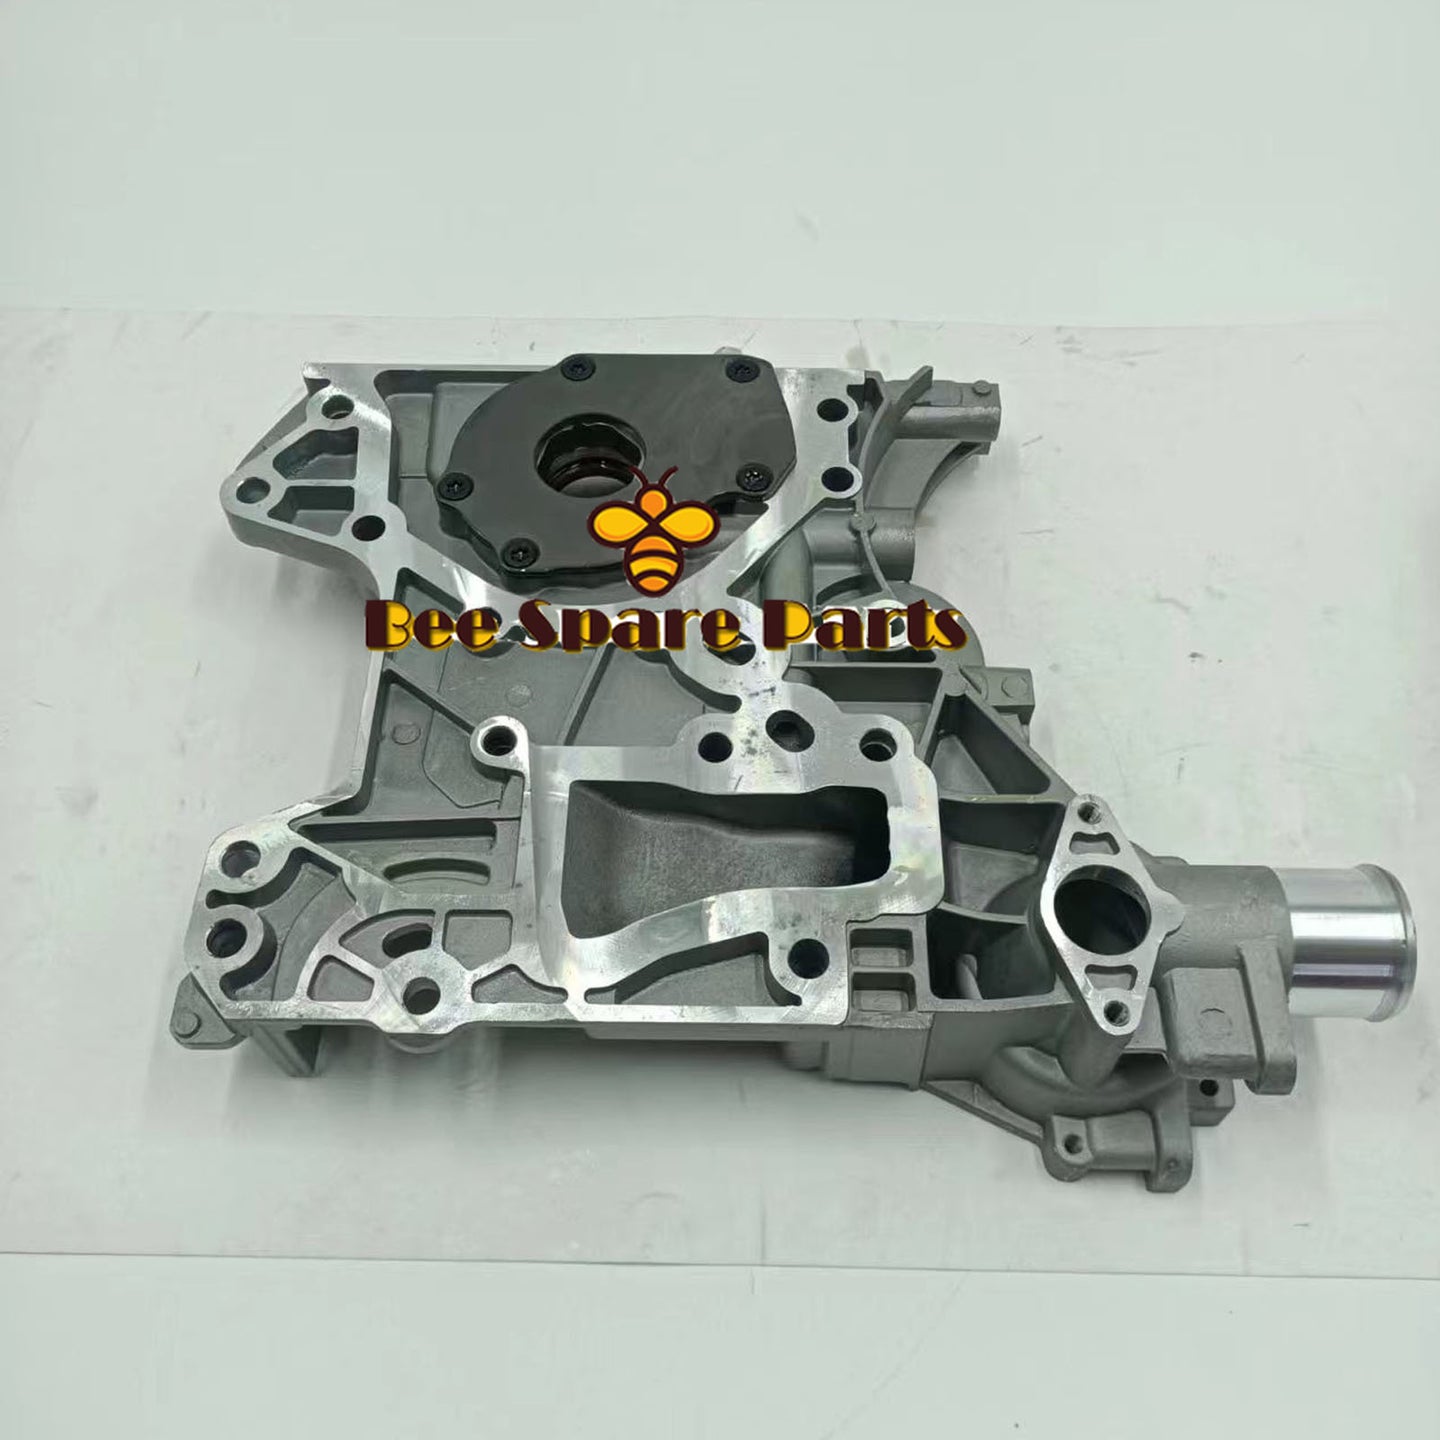 Oil Pump Timing Cover 55556428 25190867 25190897 55566793 25195117 for Chevrolet Cruze Automobile Repairing Accessory